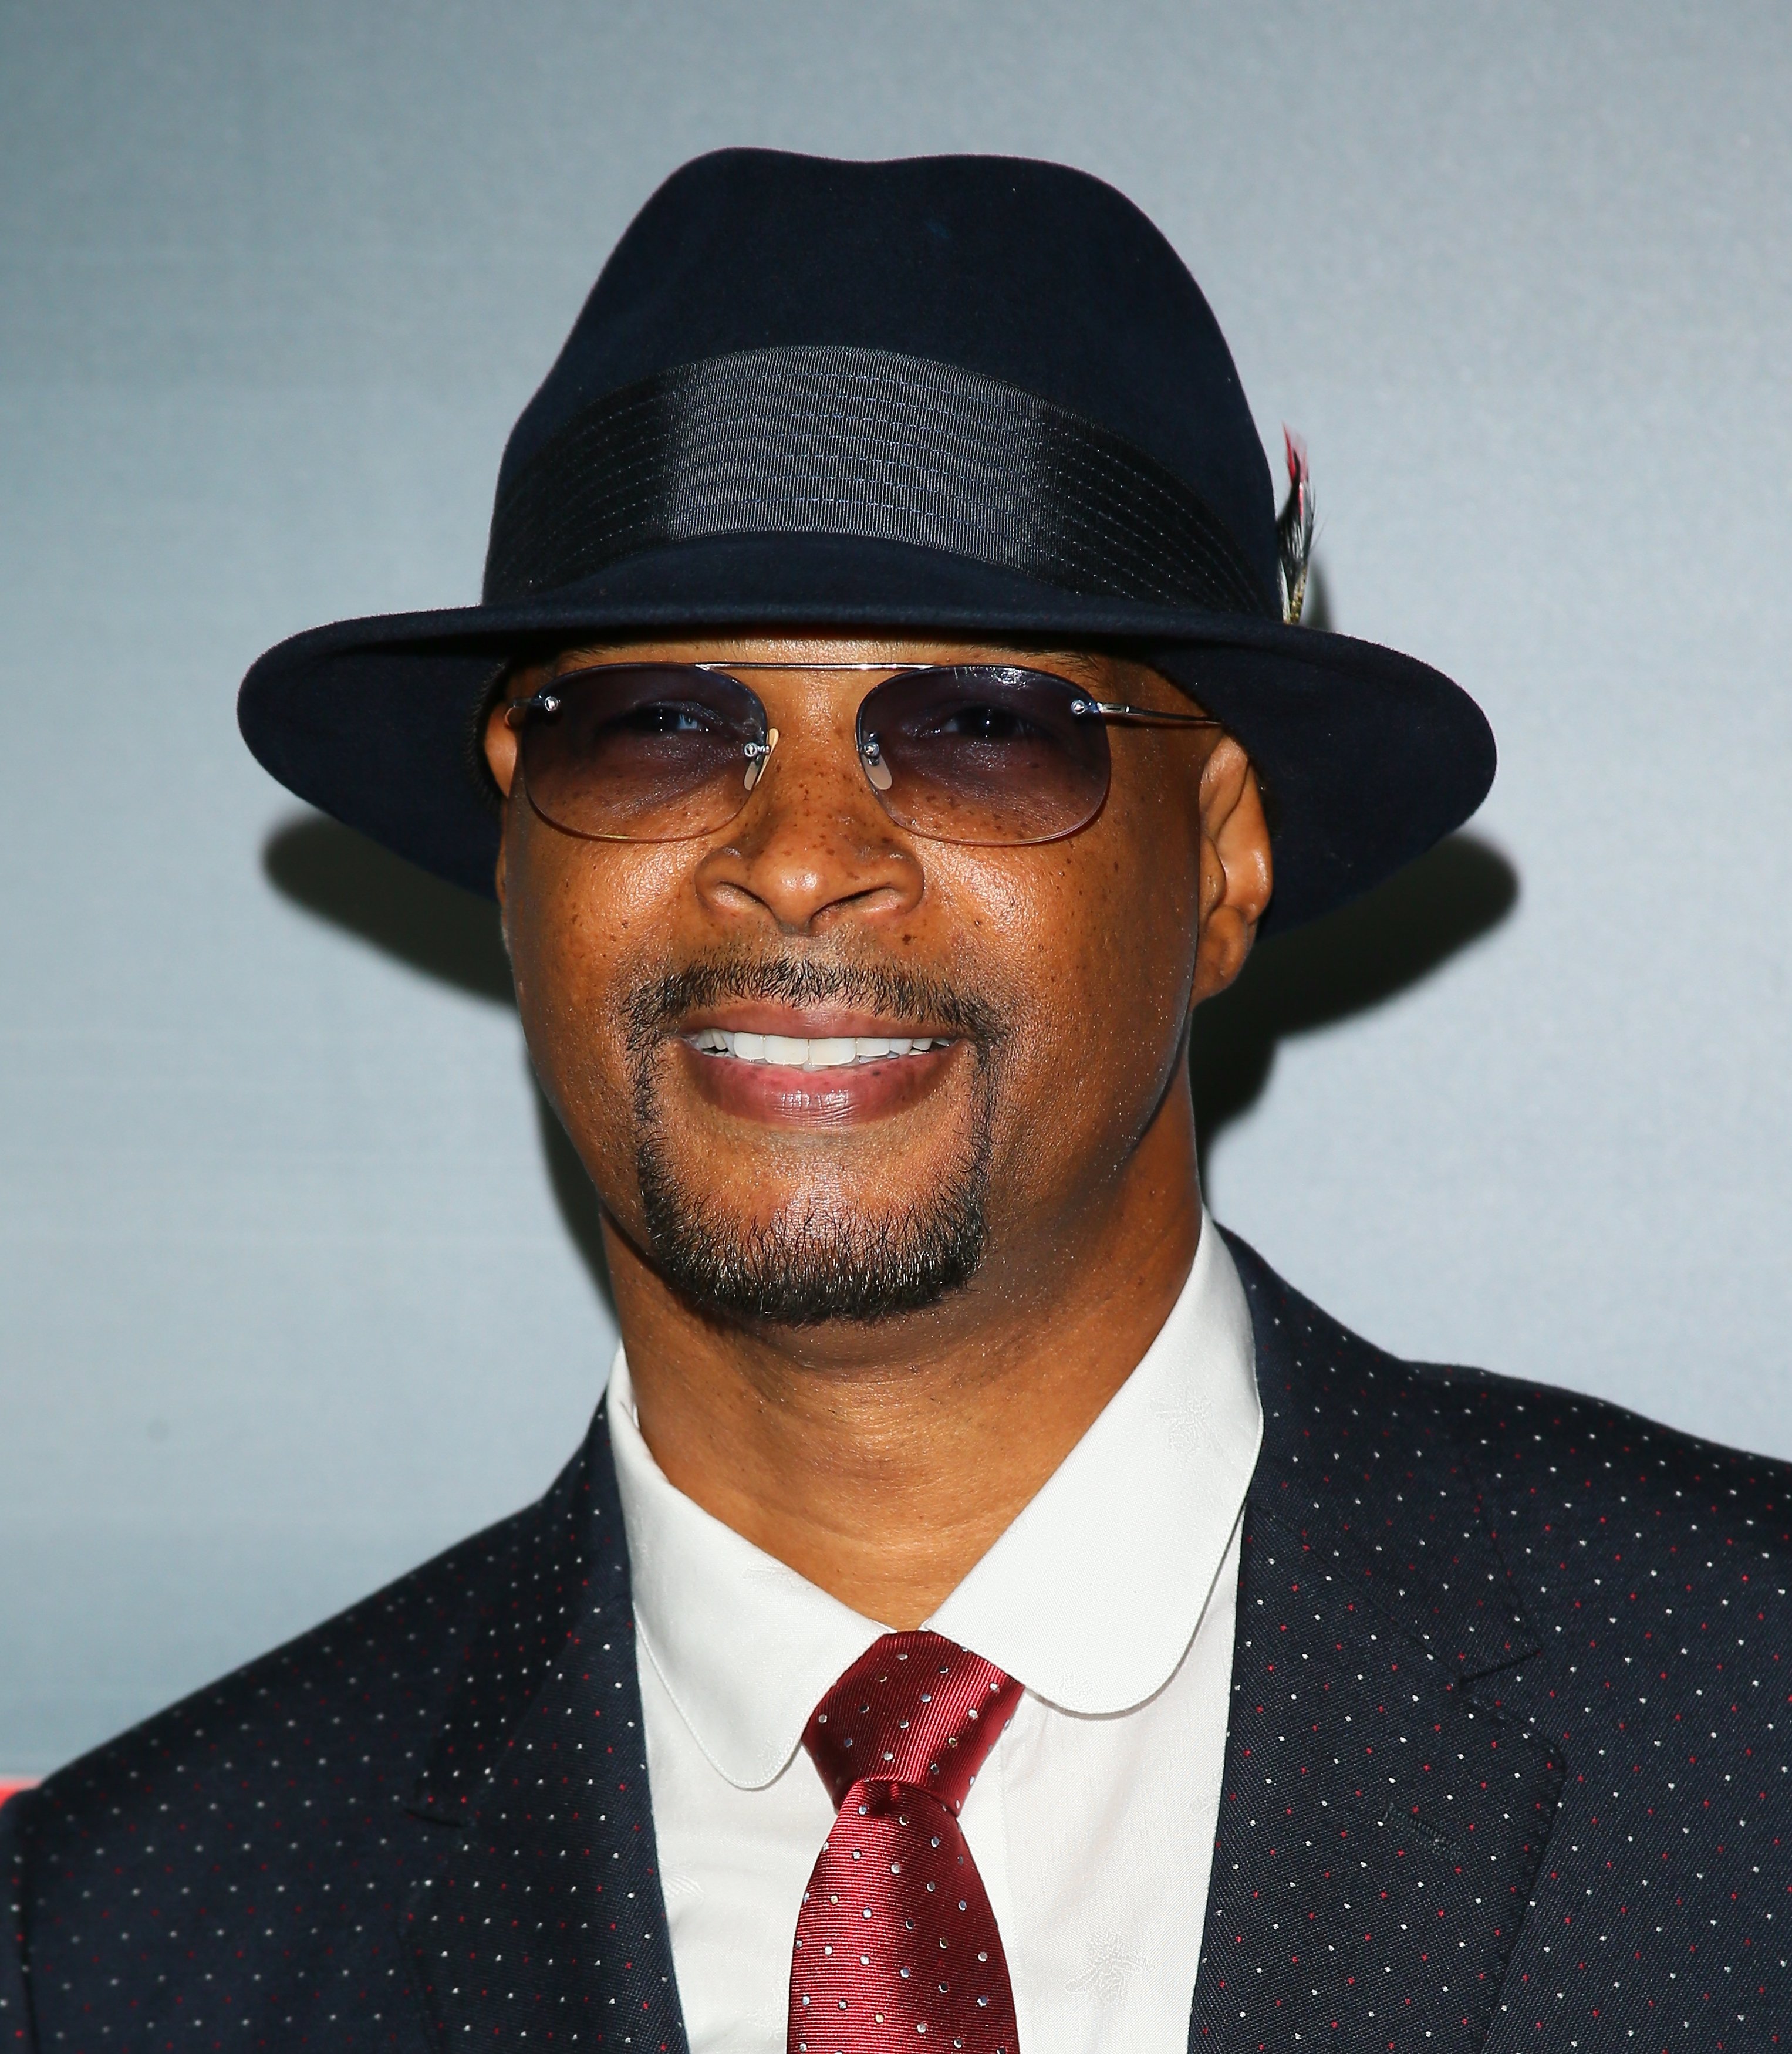 Damon Wayans at the premiere of "Lethal Weapon" on September 12, 2016 in California. | Source: Getty Images